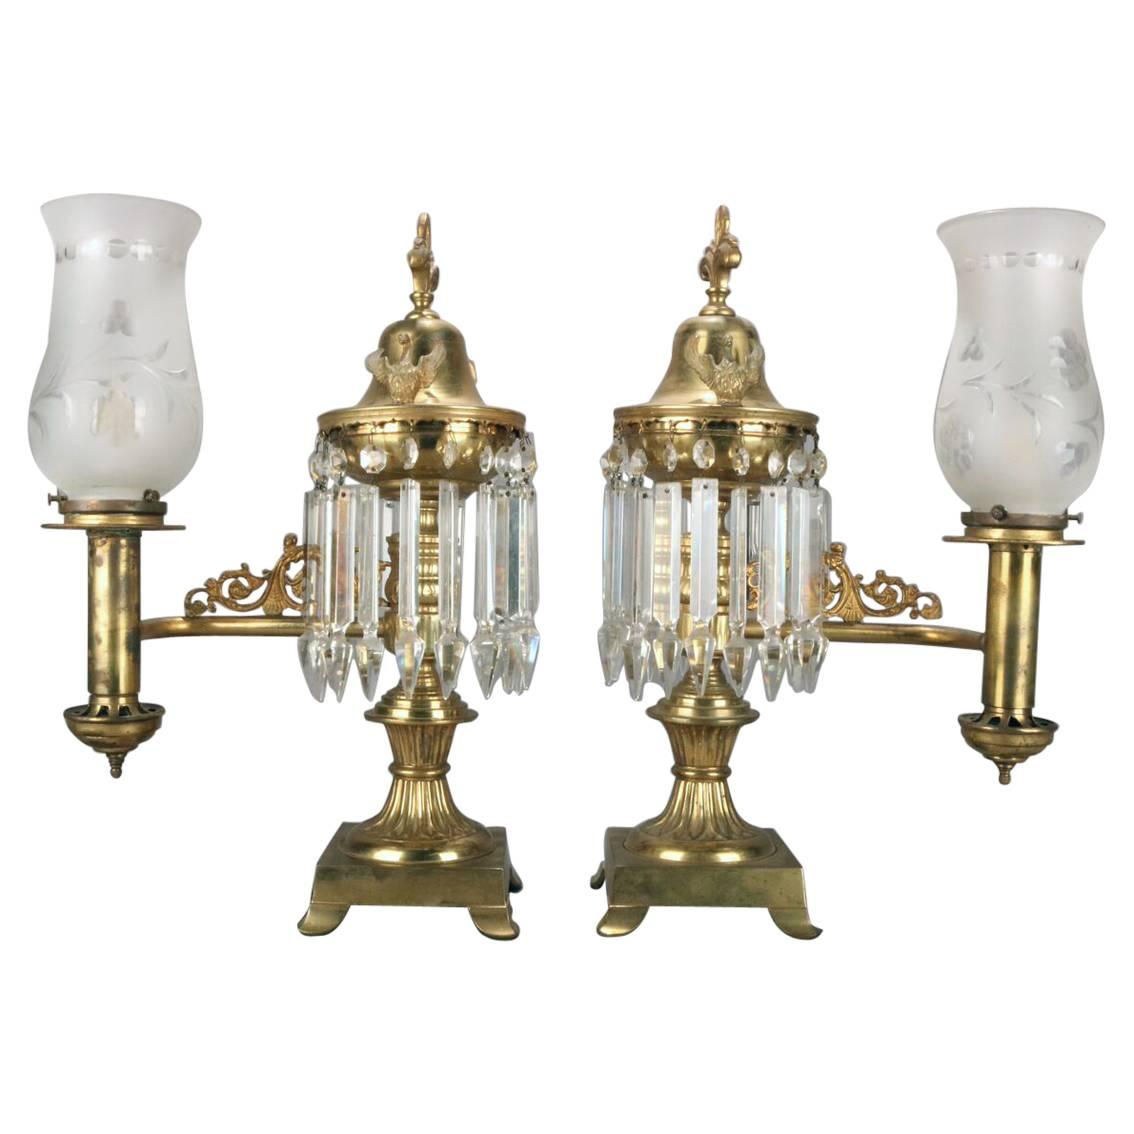 Pair of Bronze and Crystal Electrified Astral Dragon Lamps, circa 1840